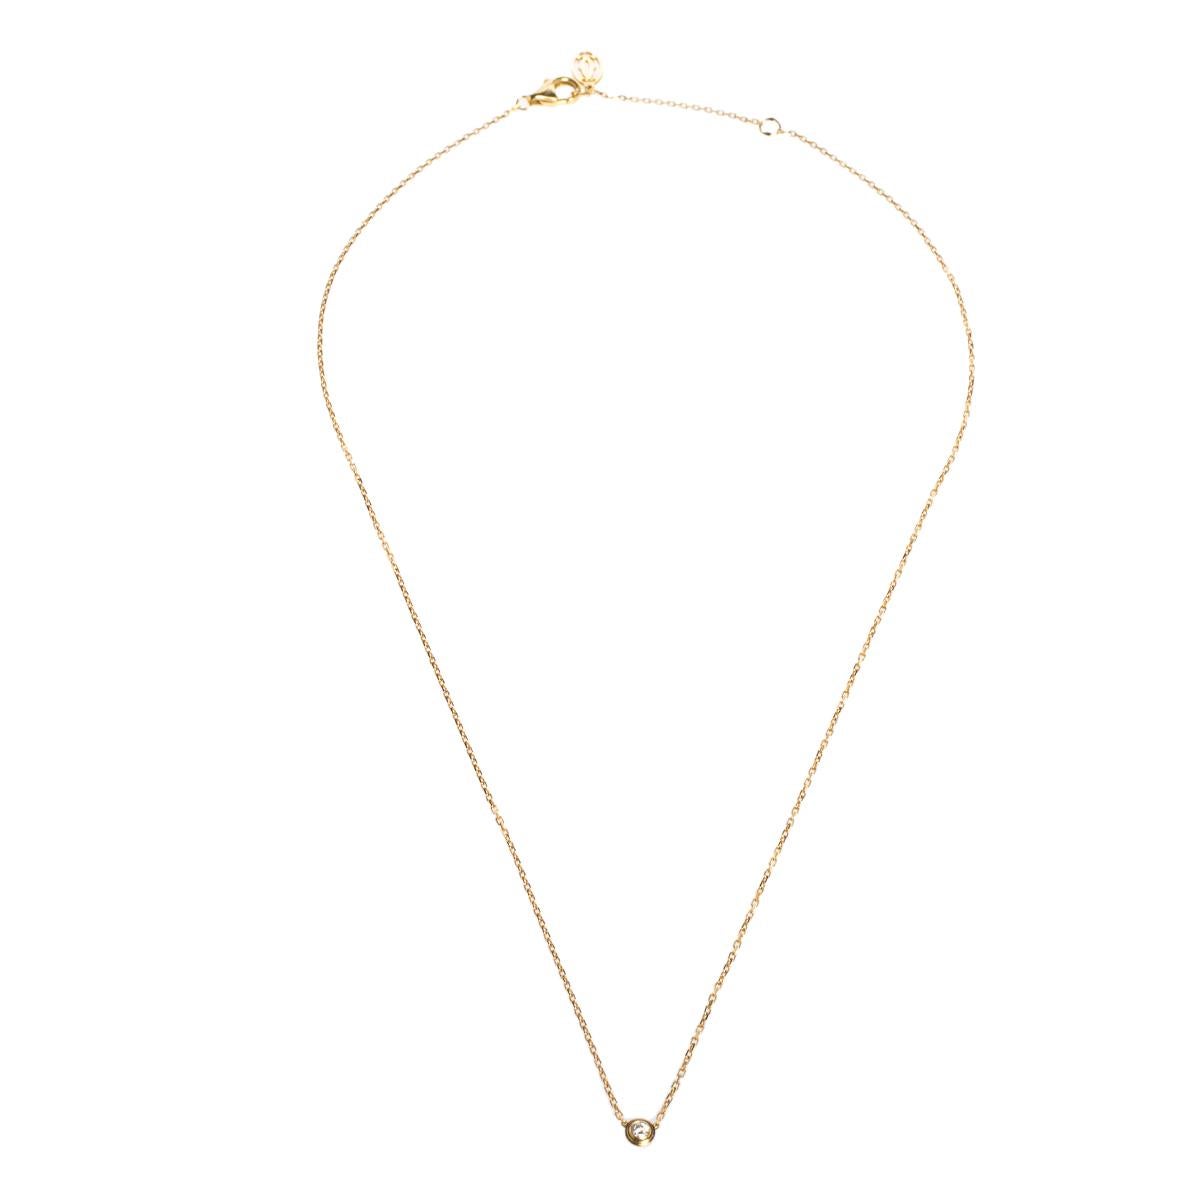 The Diamants Légers collection by Cartier is all about bringing feminine elegance into light by deploying exceptional diamonds into minimalist designs. This necklace rendered in 18k yellow gold exhibits just that. It consists of a simple chain